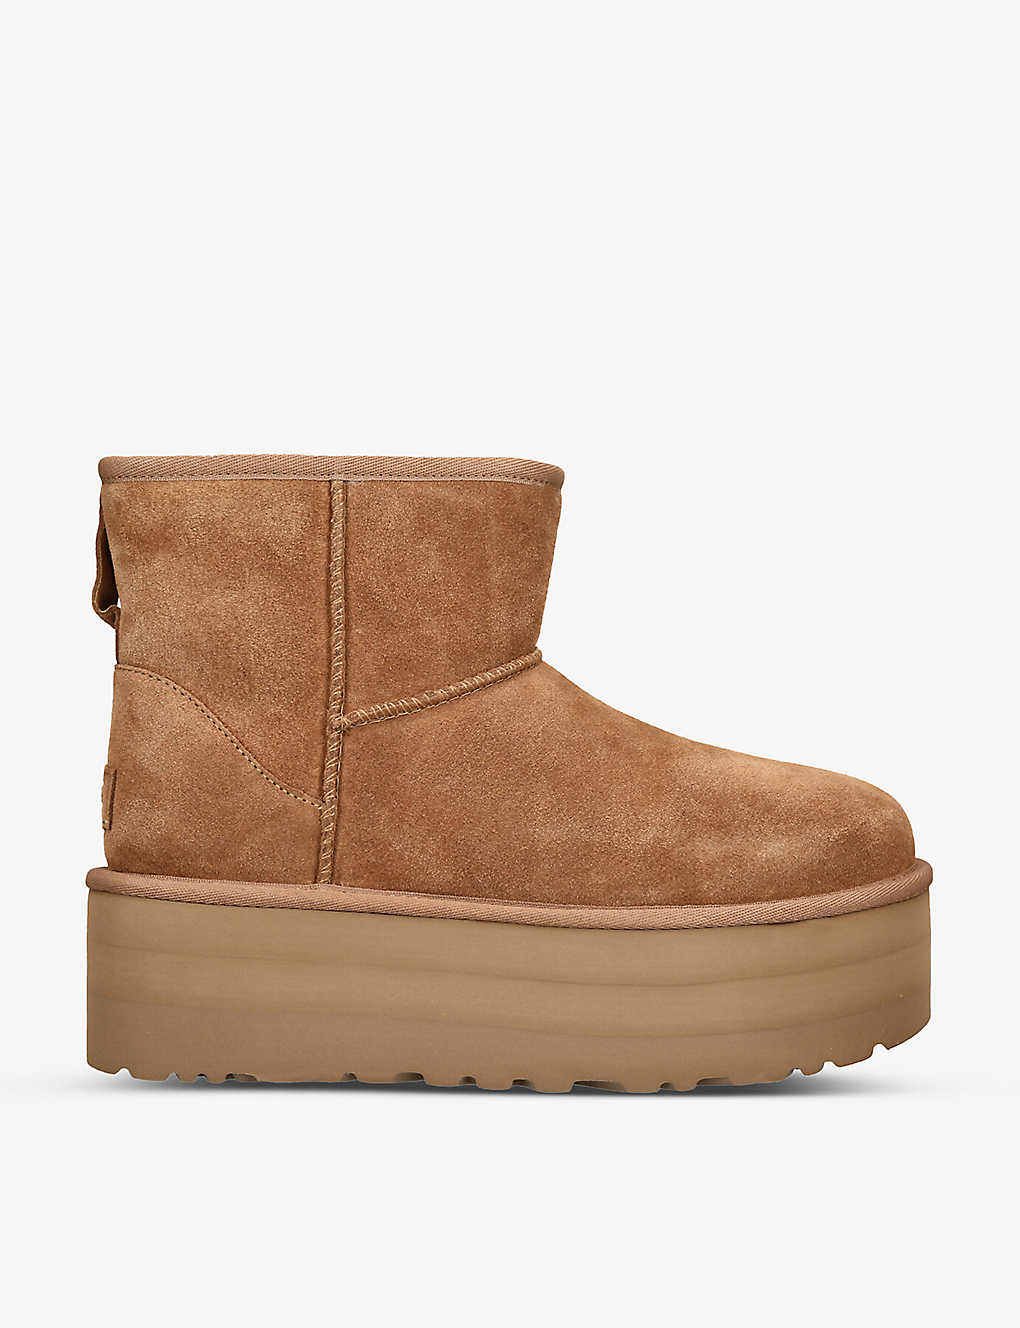 Ugg Womens Tan Classic Mini Platform Suede And Shearling Boots